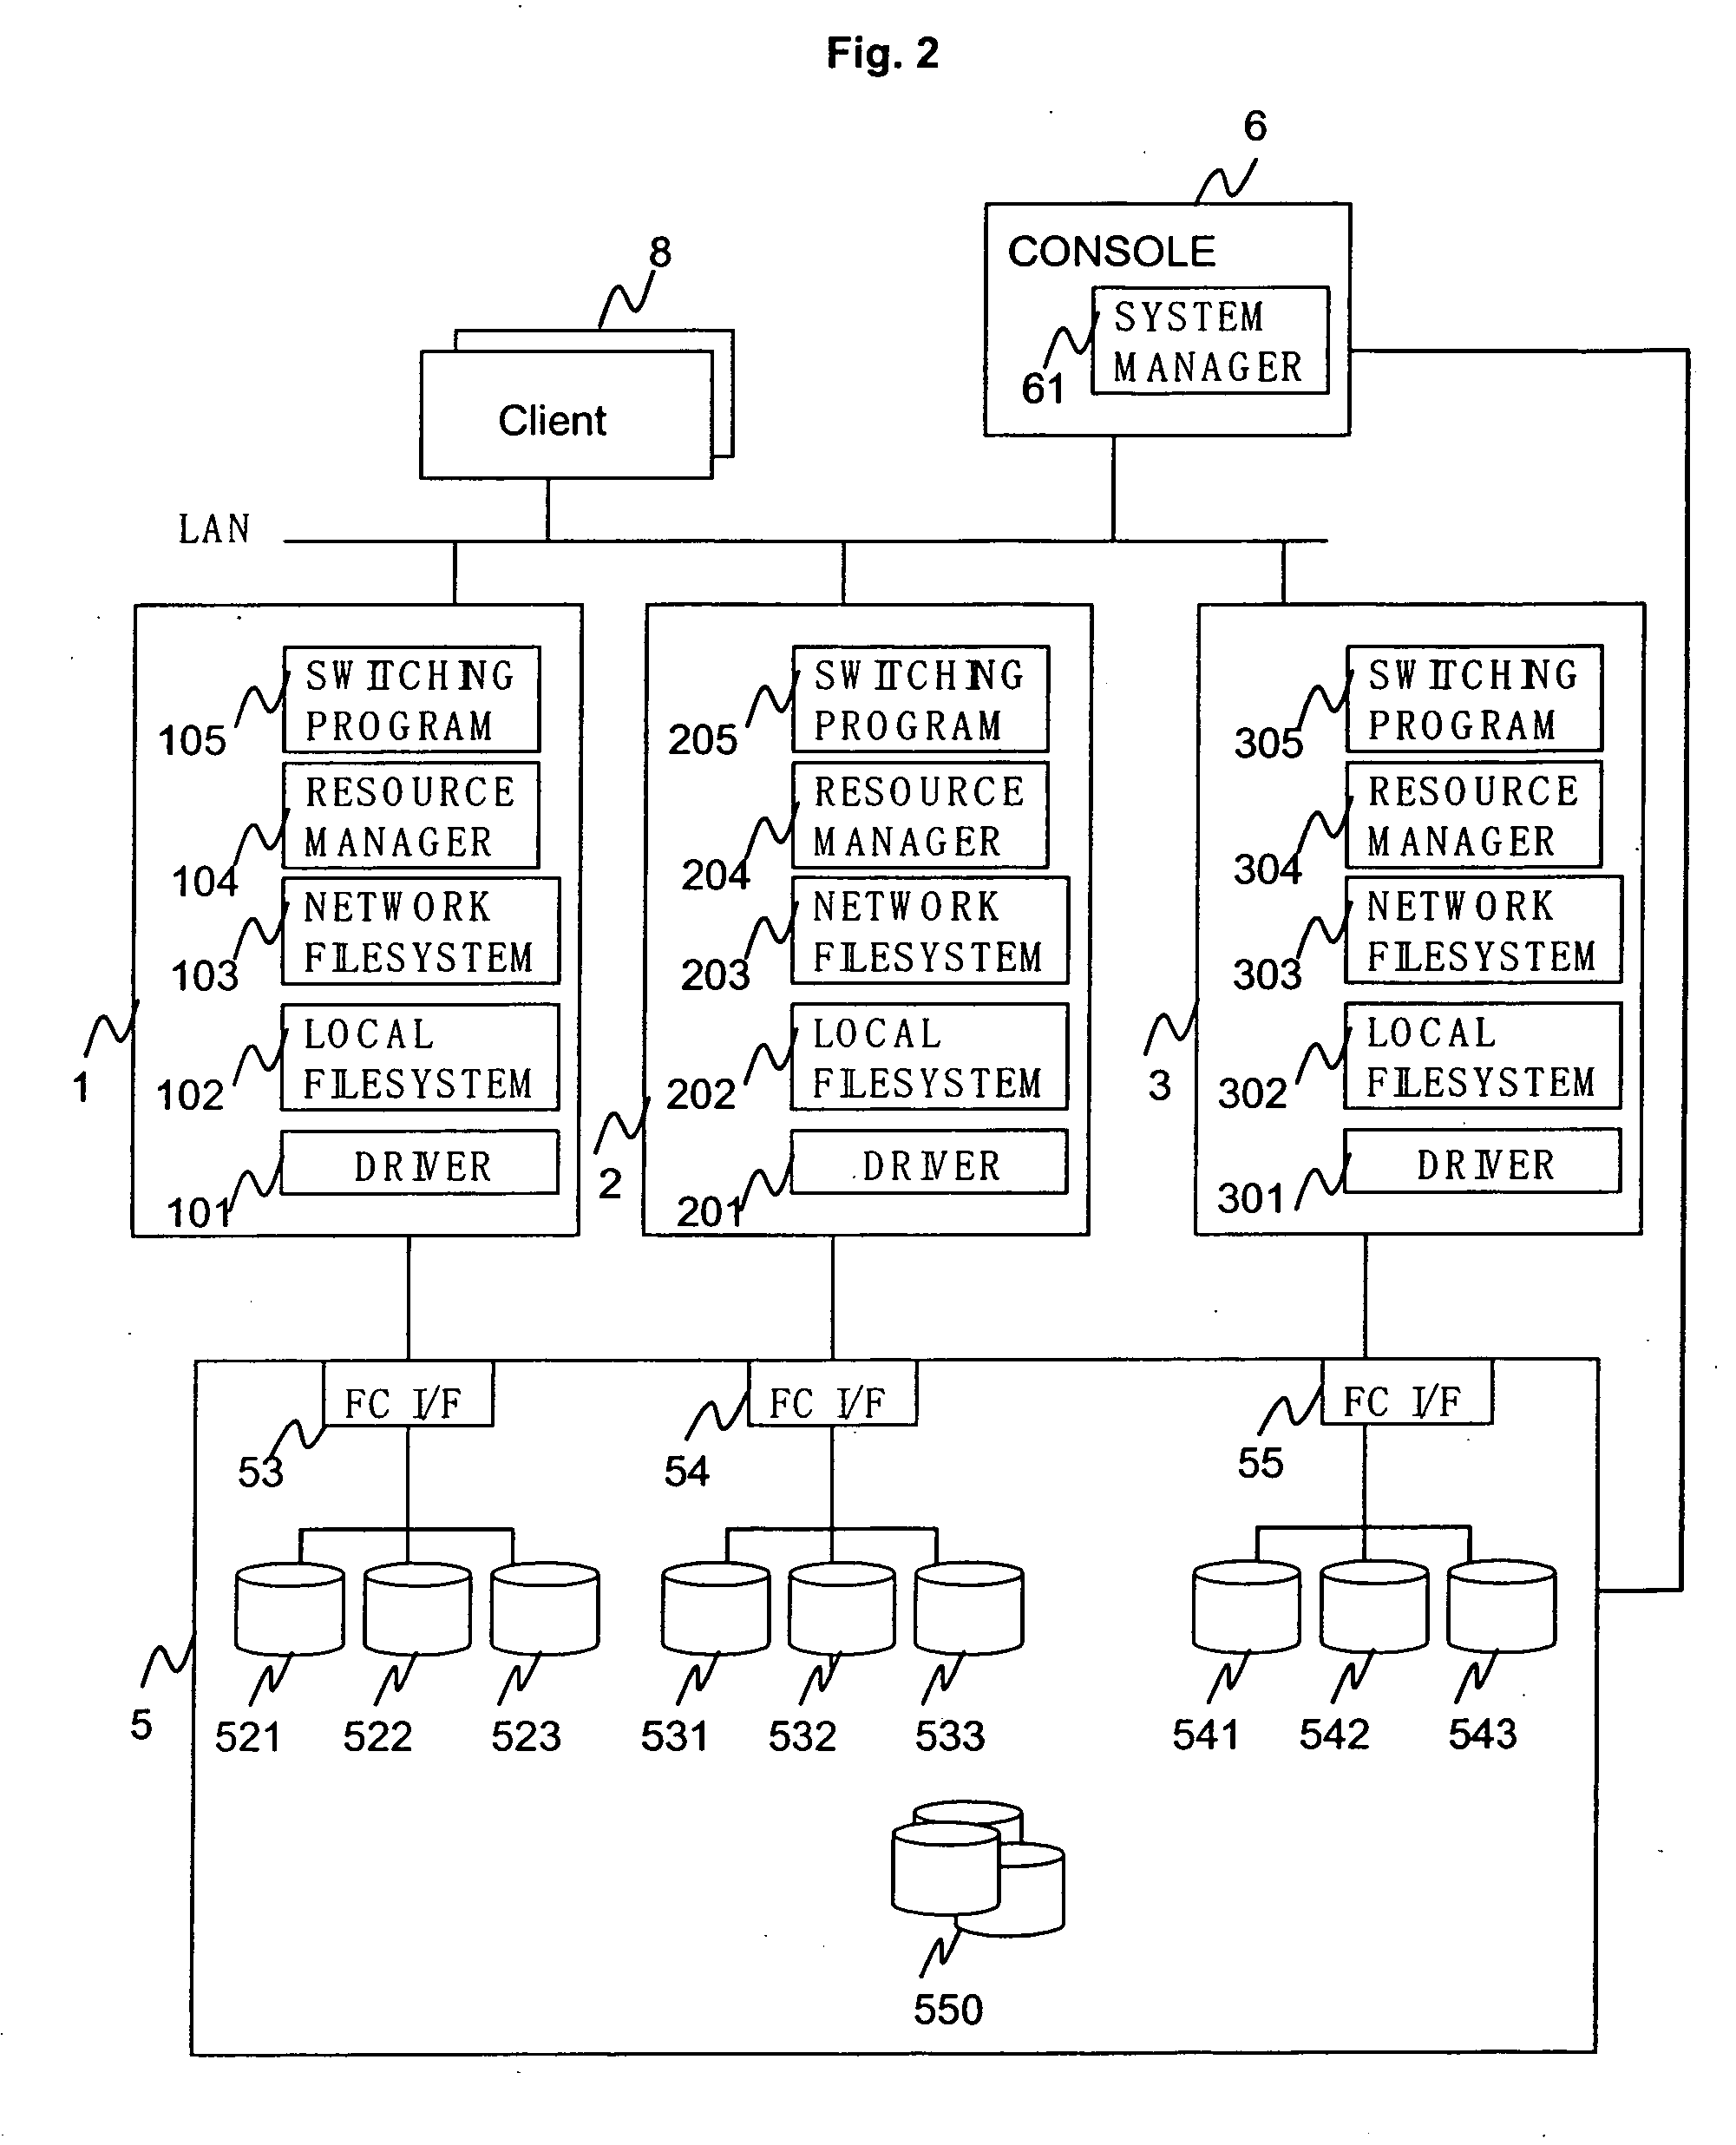 Method of dynamically balancing workload of a storage system